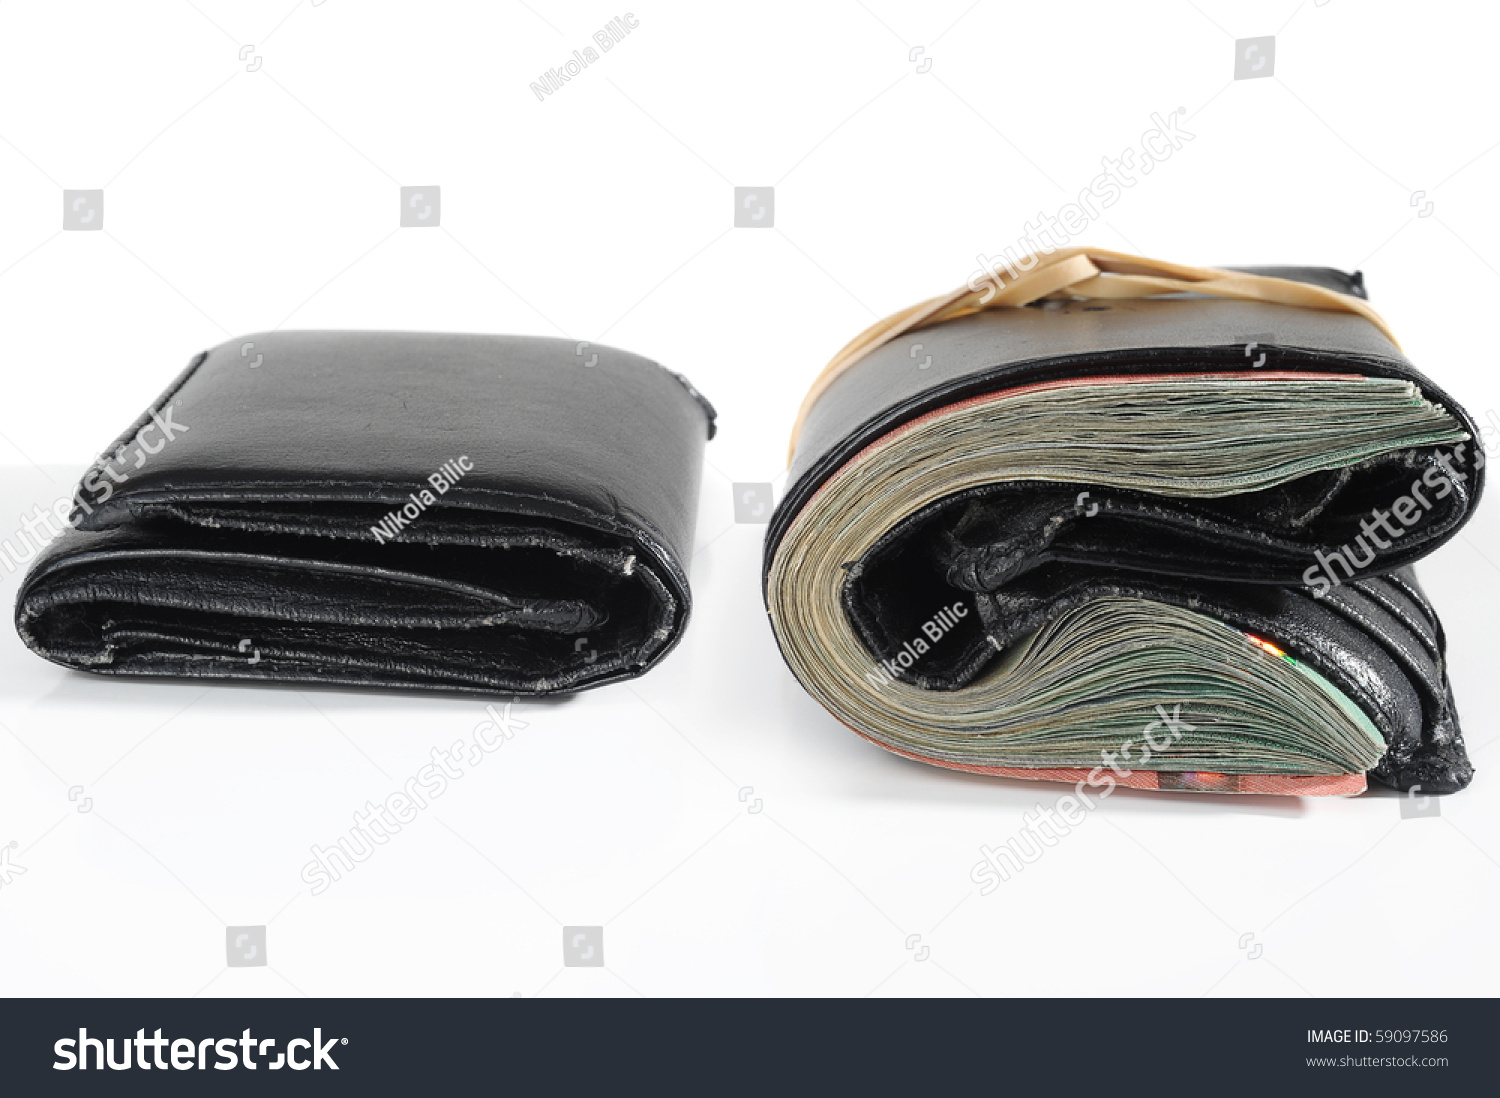 stock-photo-empty-and-full-wallet-on-white-background-59097586.jpg